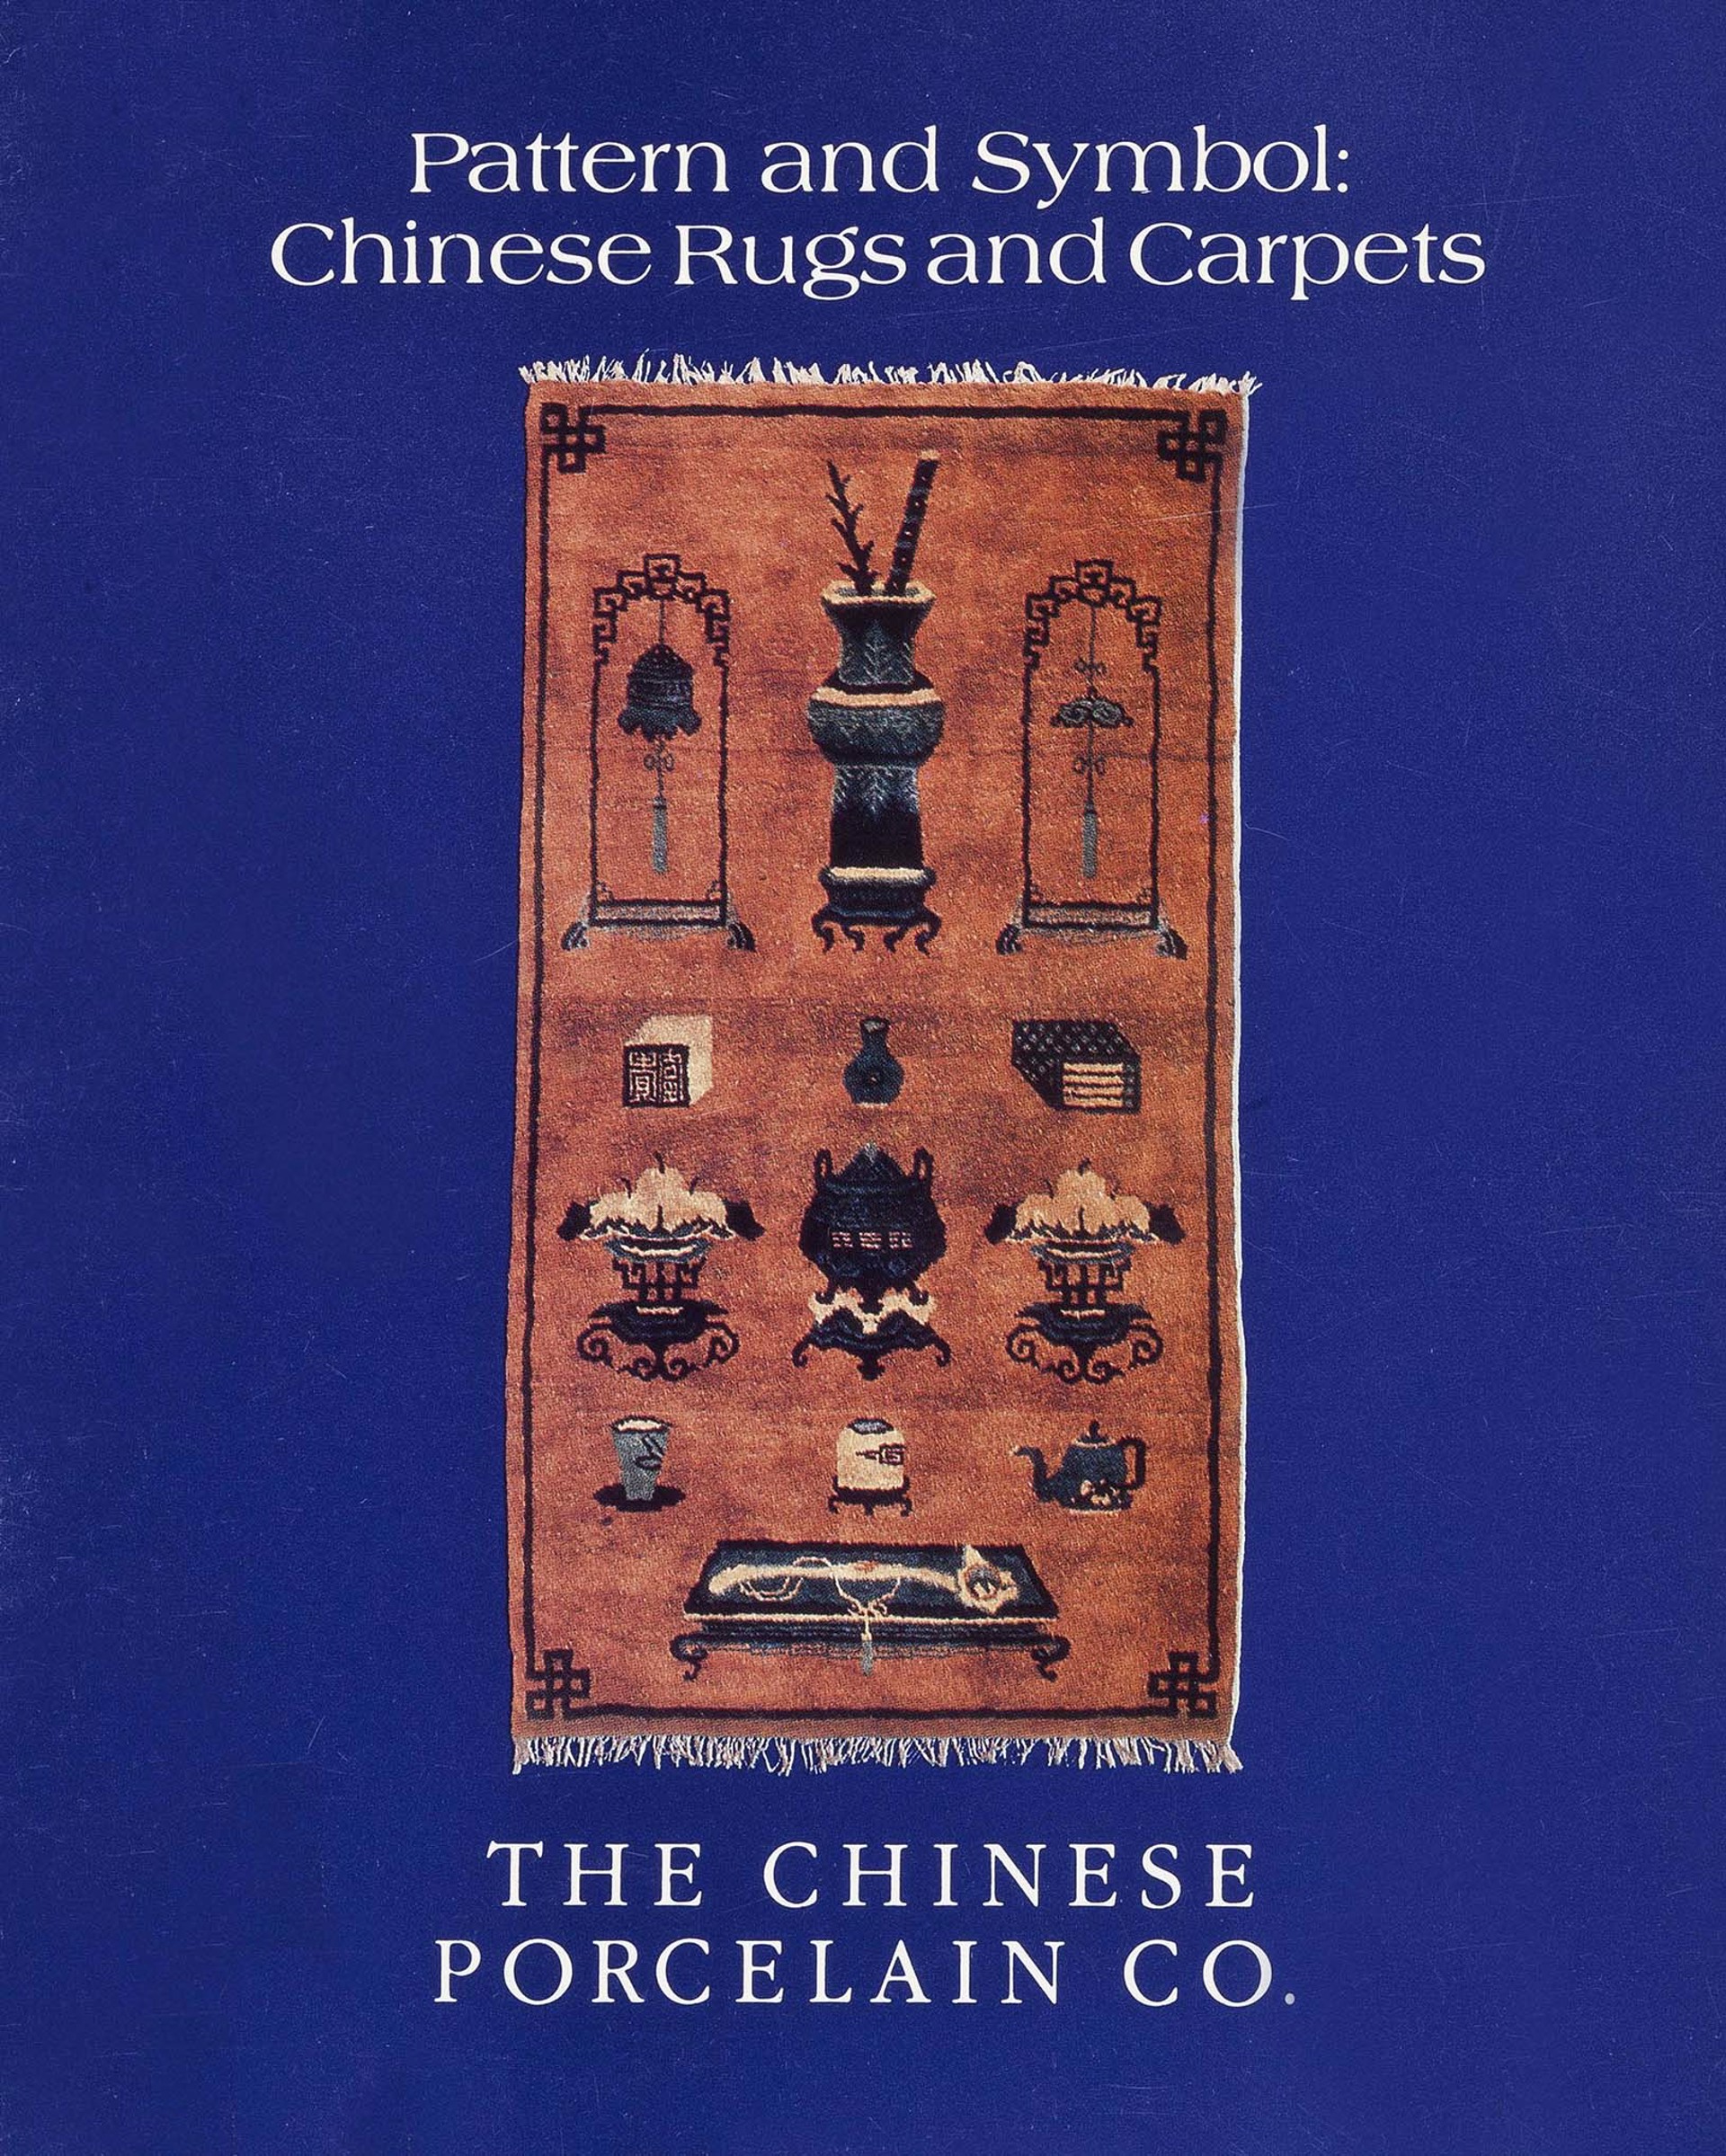 Pattern and Symbol: Chinese Rugs and Carpets by Catalog 02